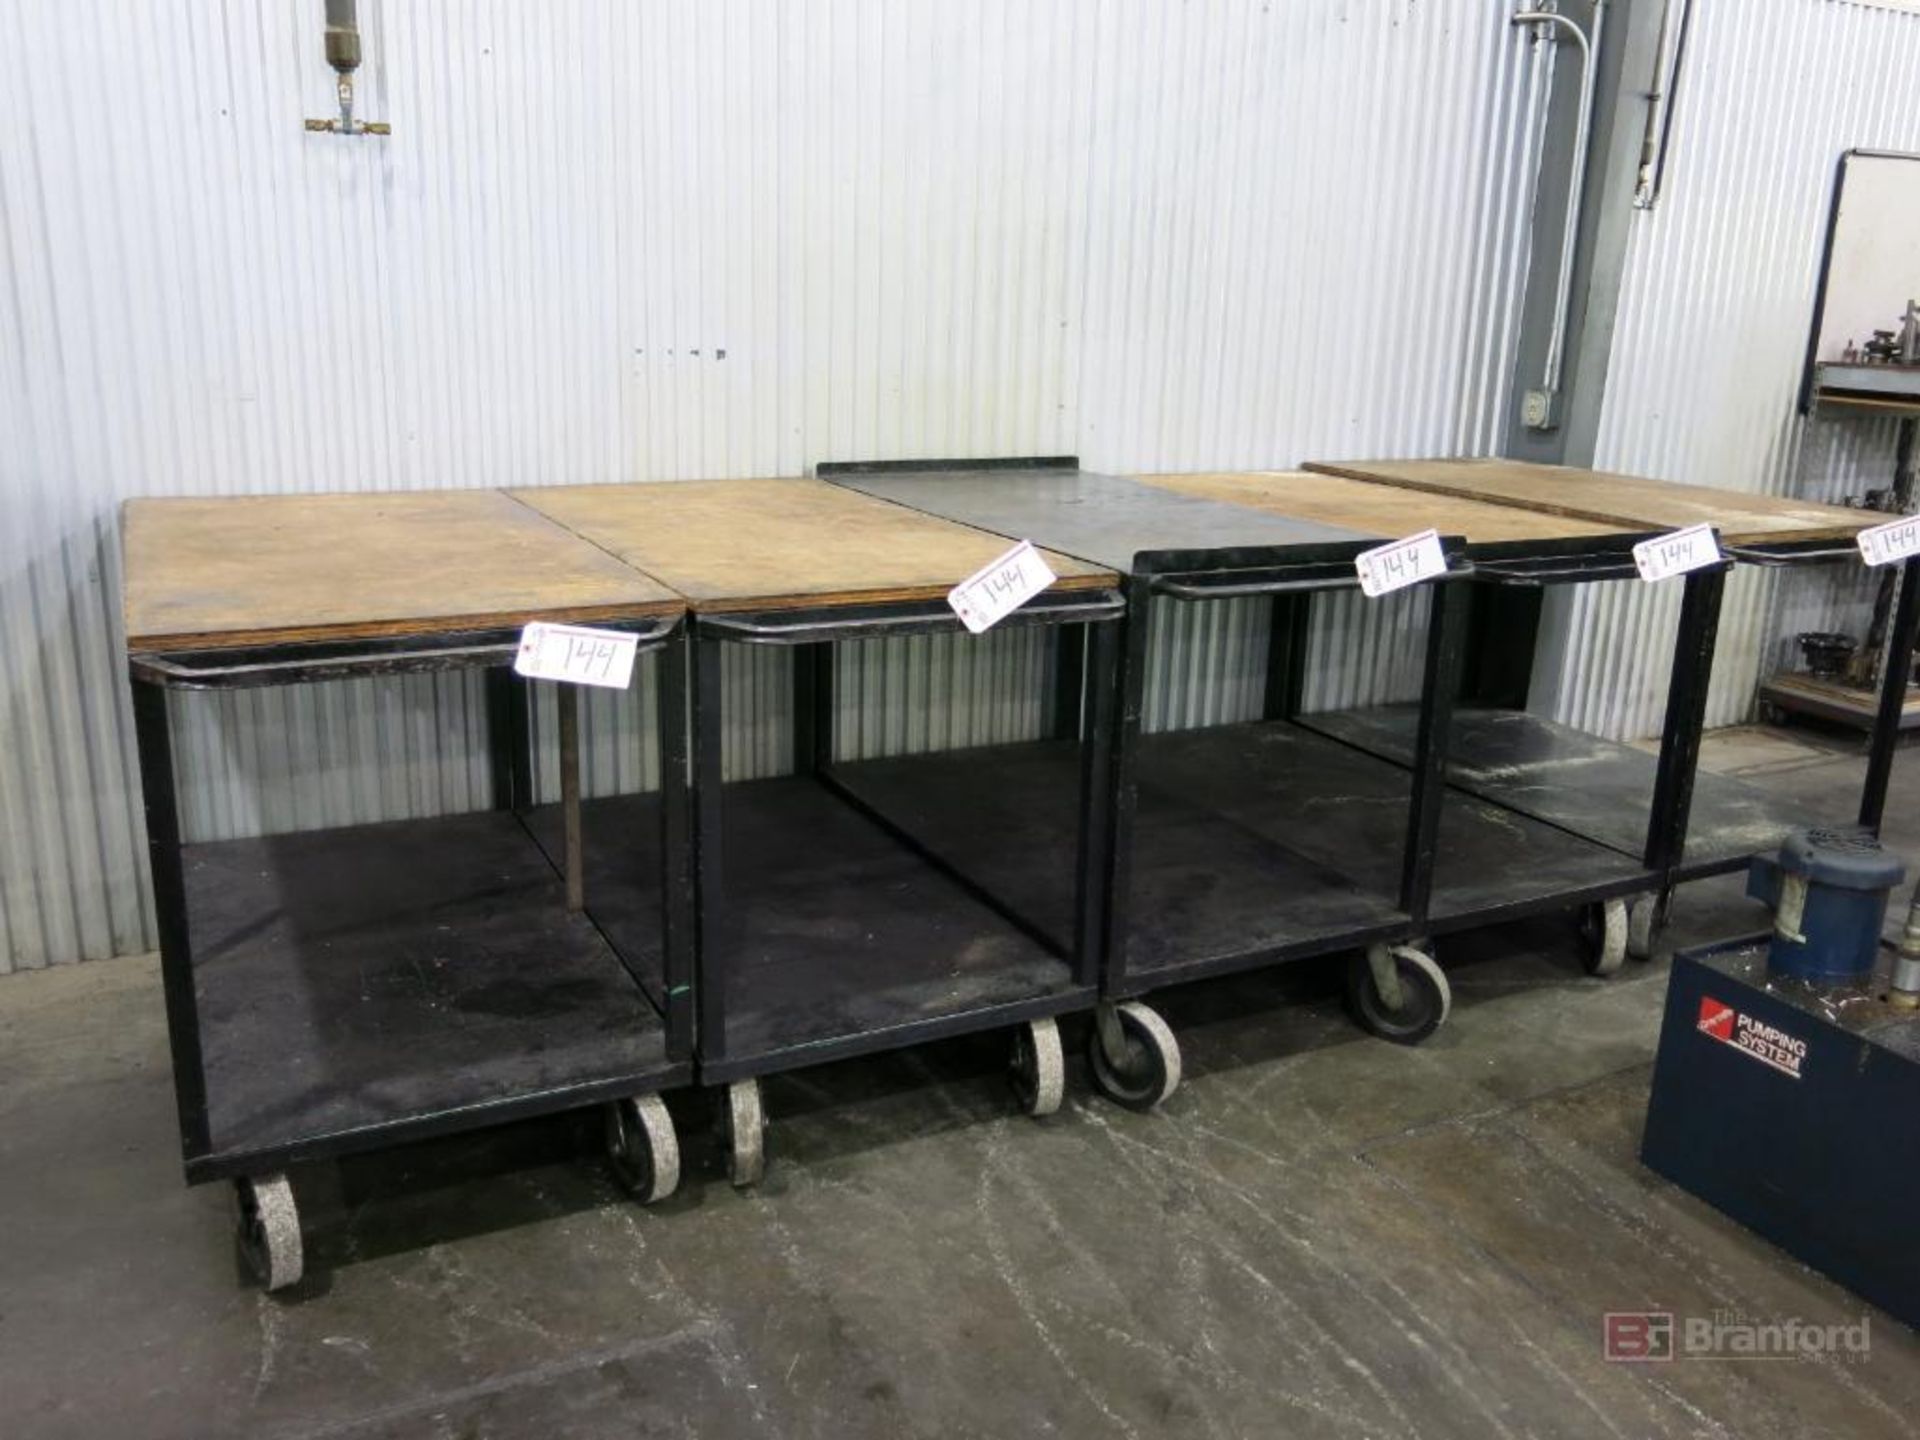 (5) 57" x 30" Heavy Duty Steel Castered Carts